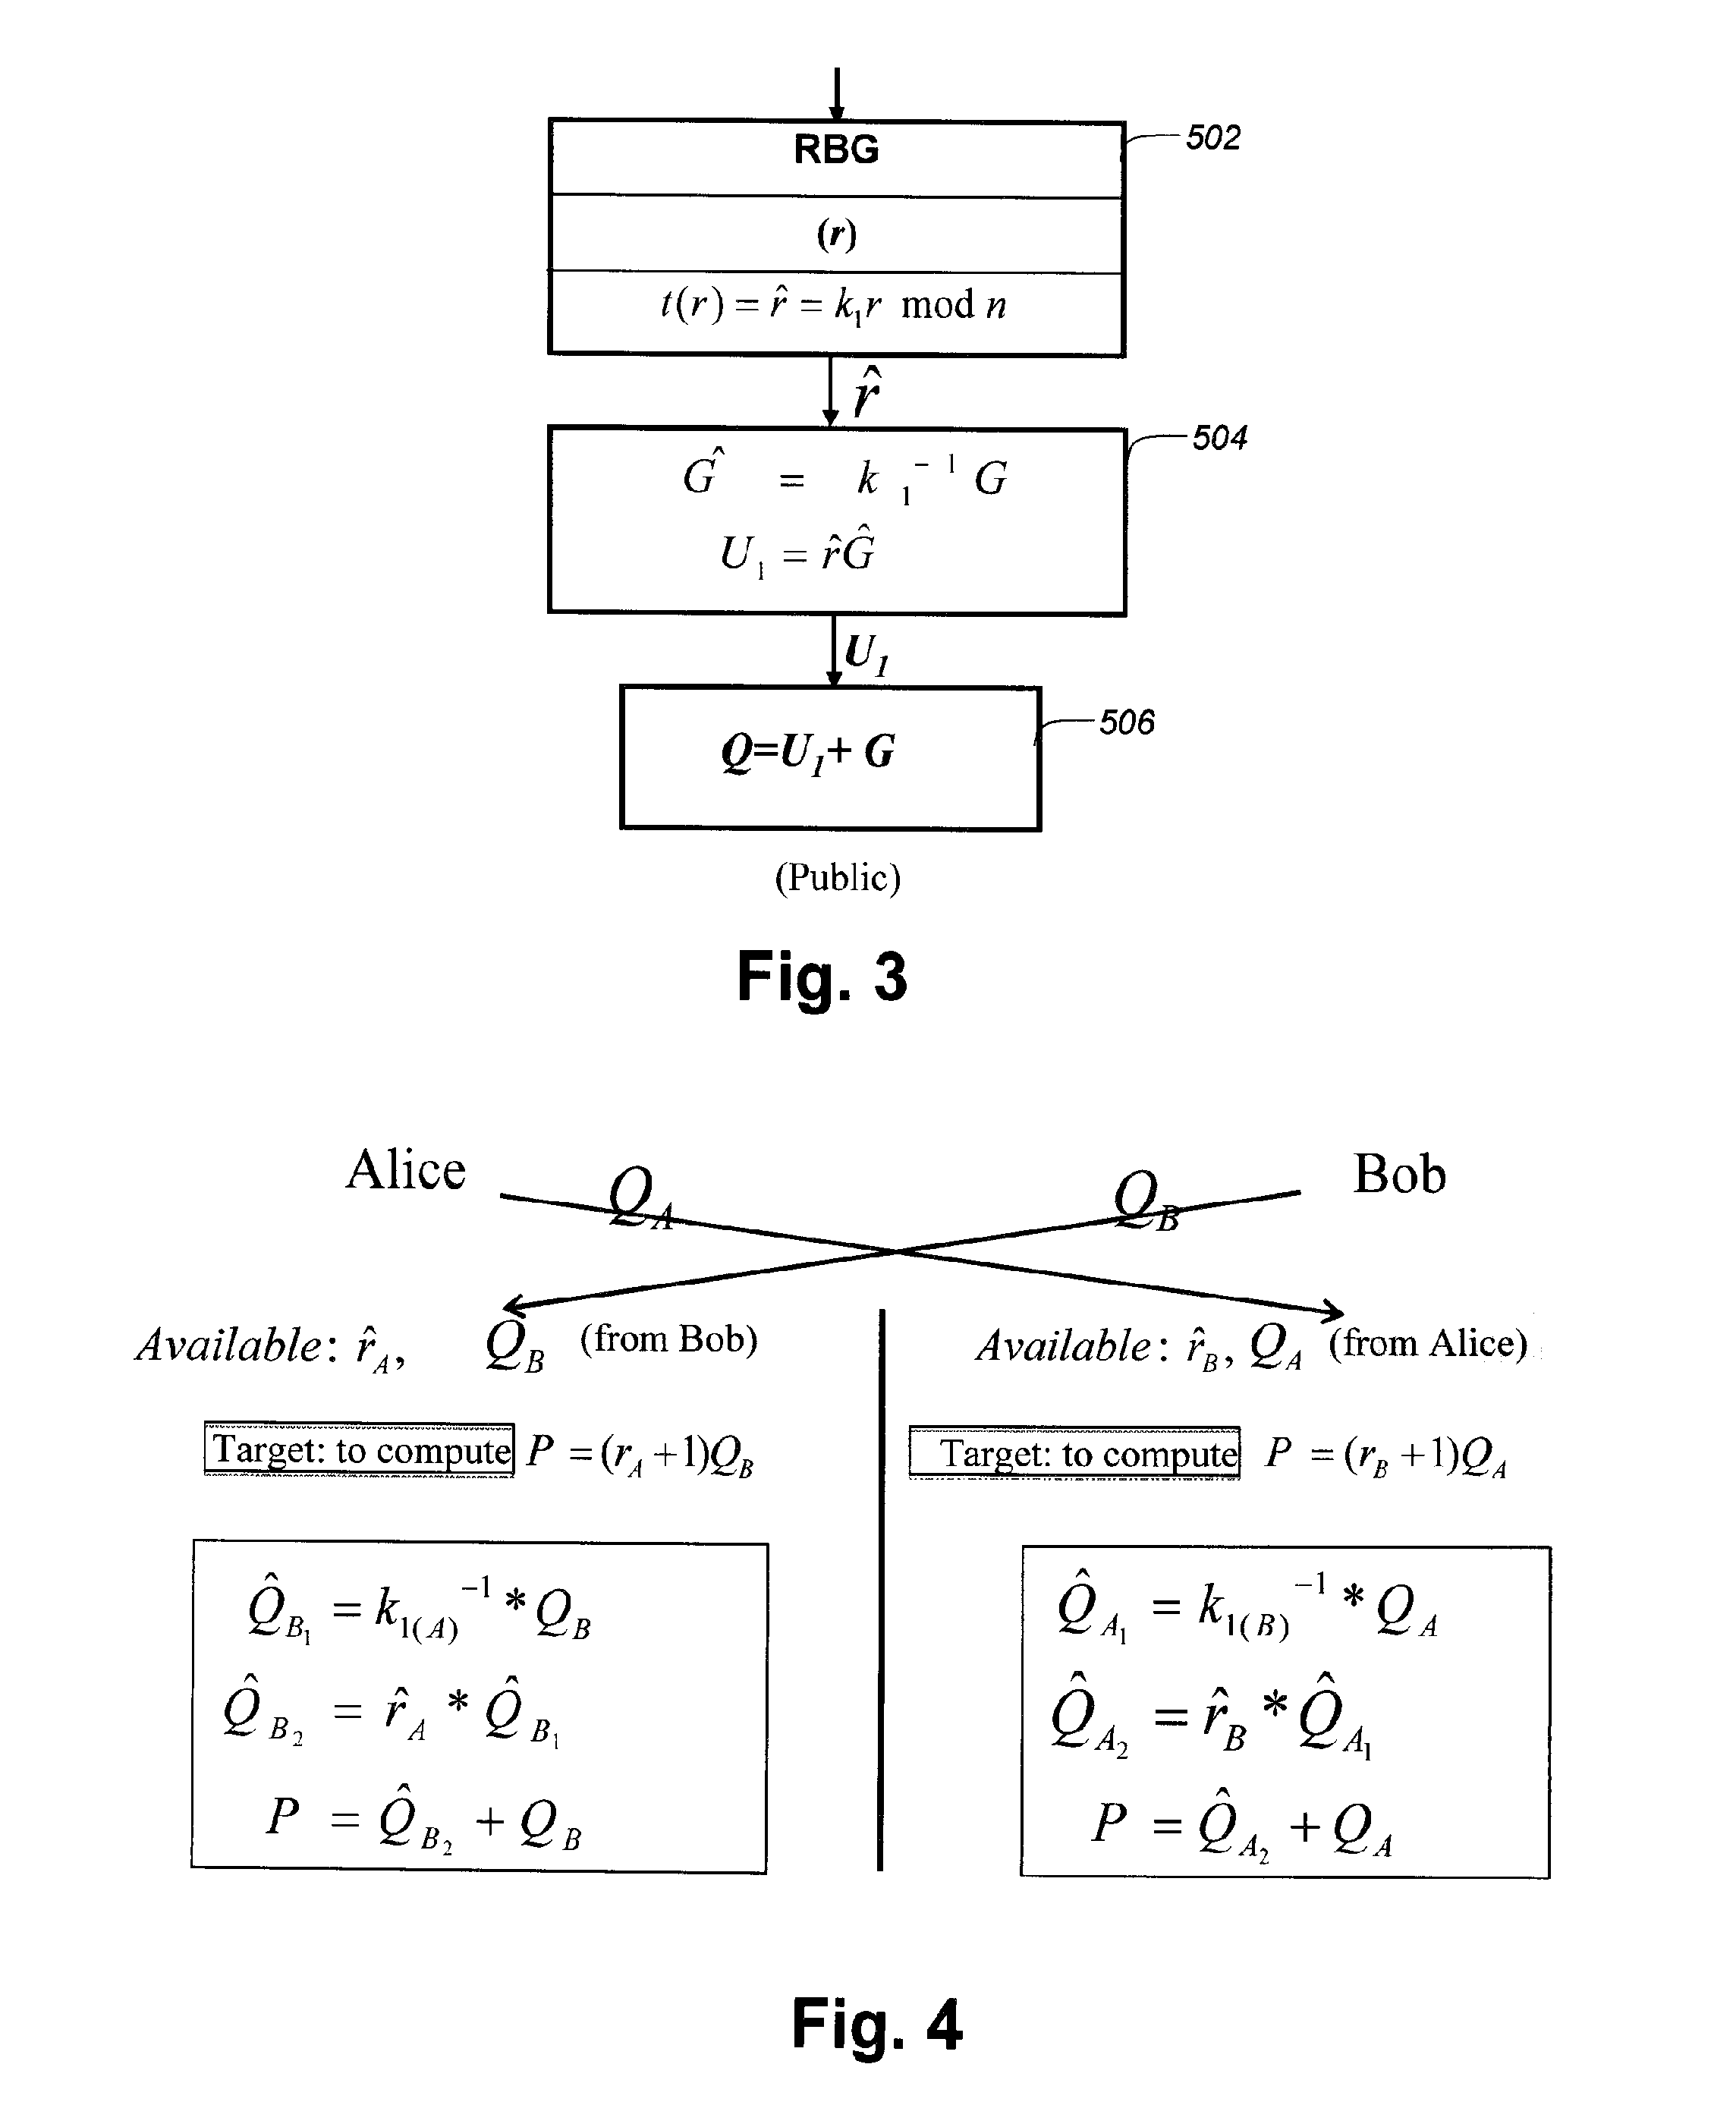 System and method for generating and protecting cryptographic keys